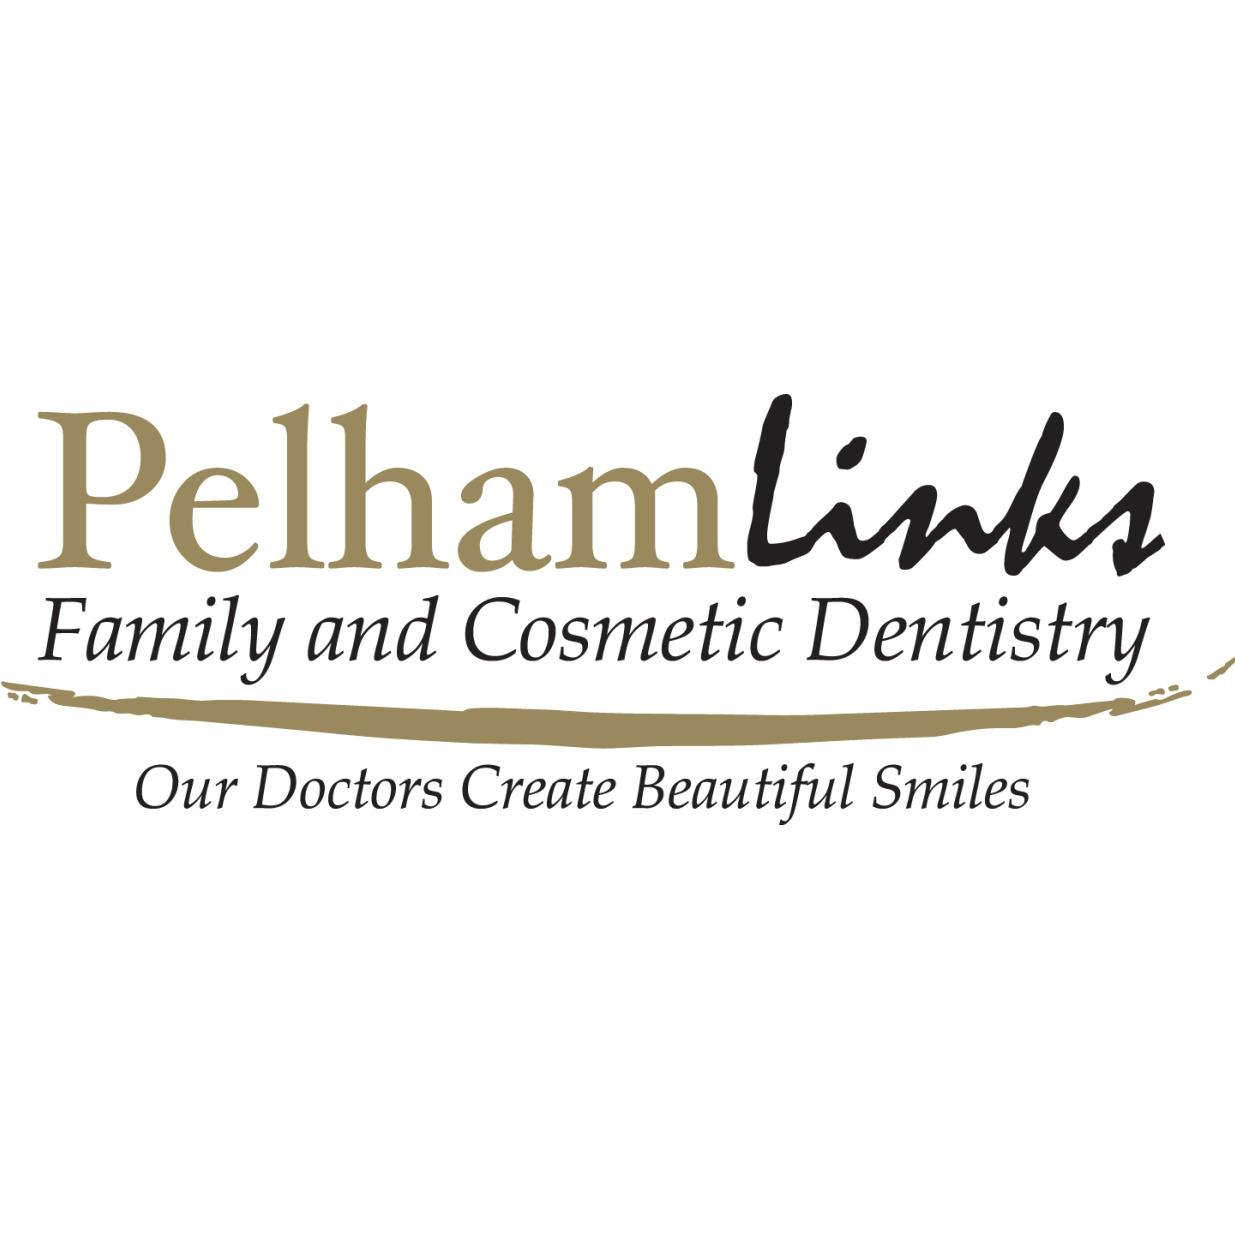 Pelham Links Family and Cosmetic Dentistry - Simpsonville - Simpsonville, SC 29680 - (864)757-1500 | ShowMeLocal.com